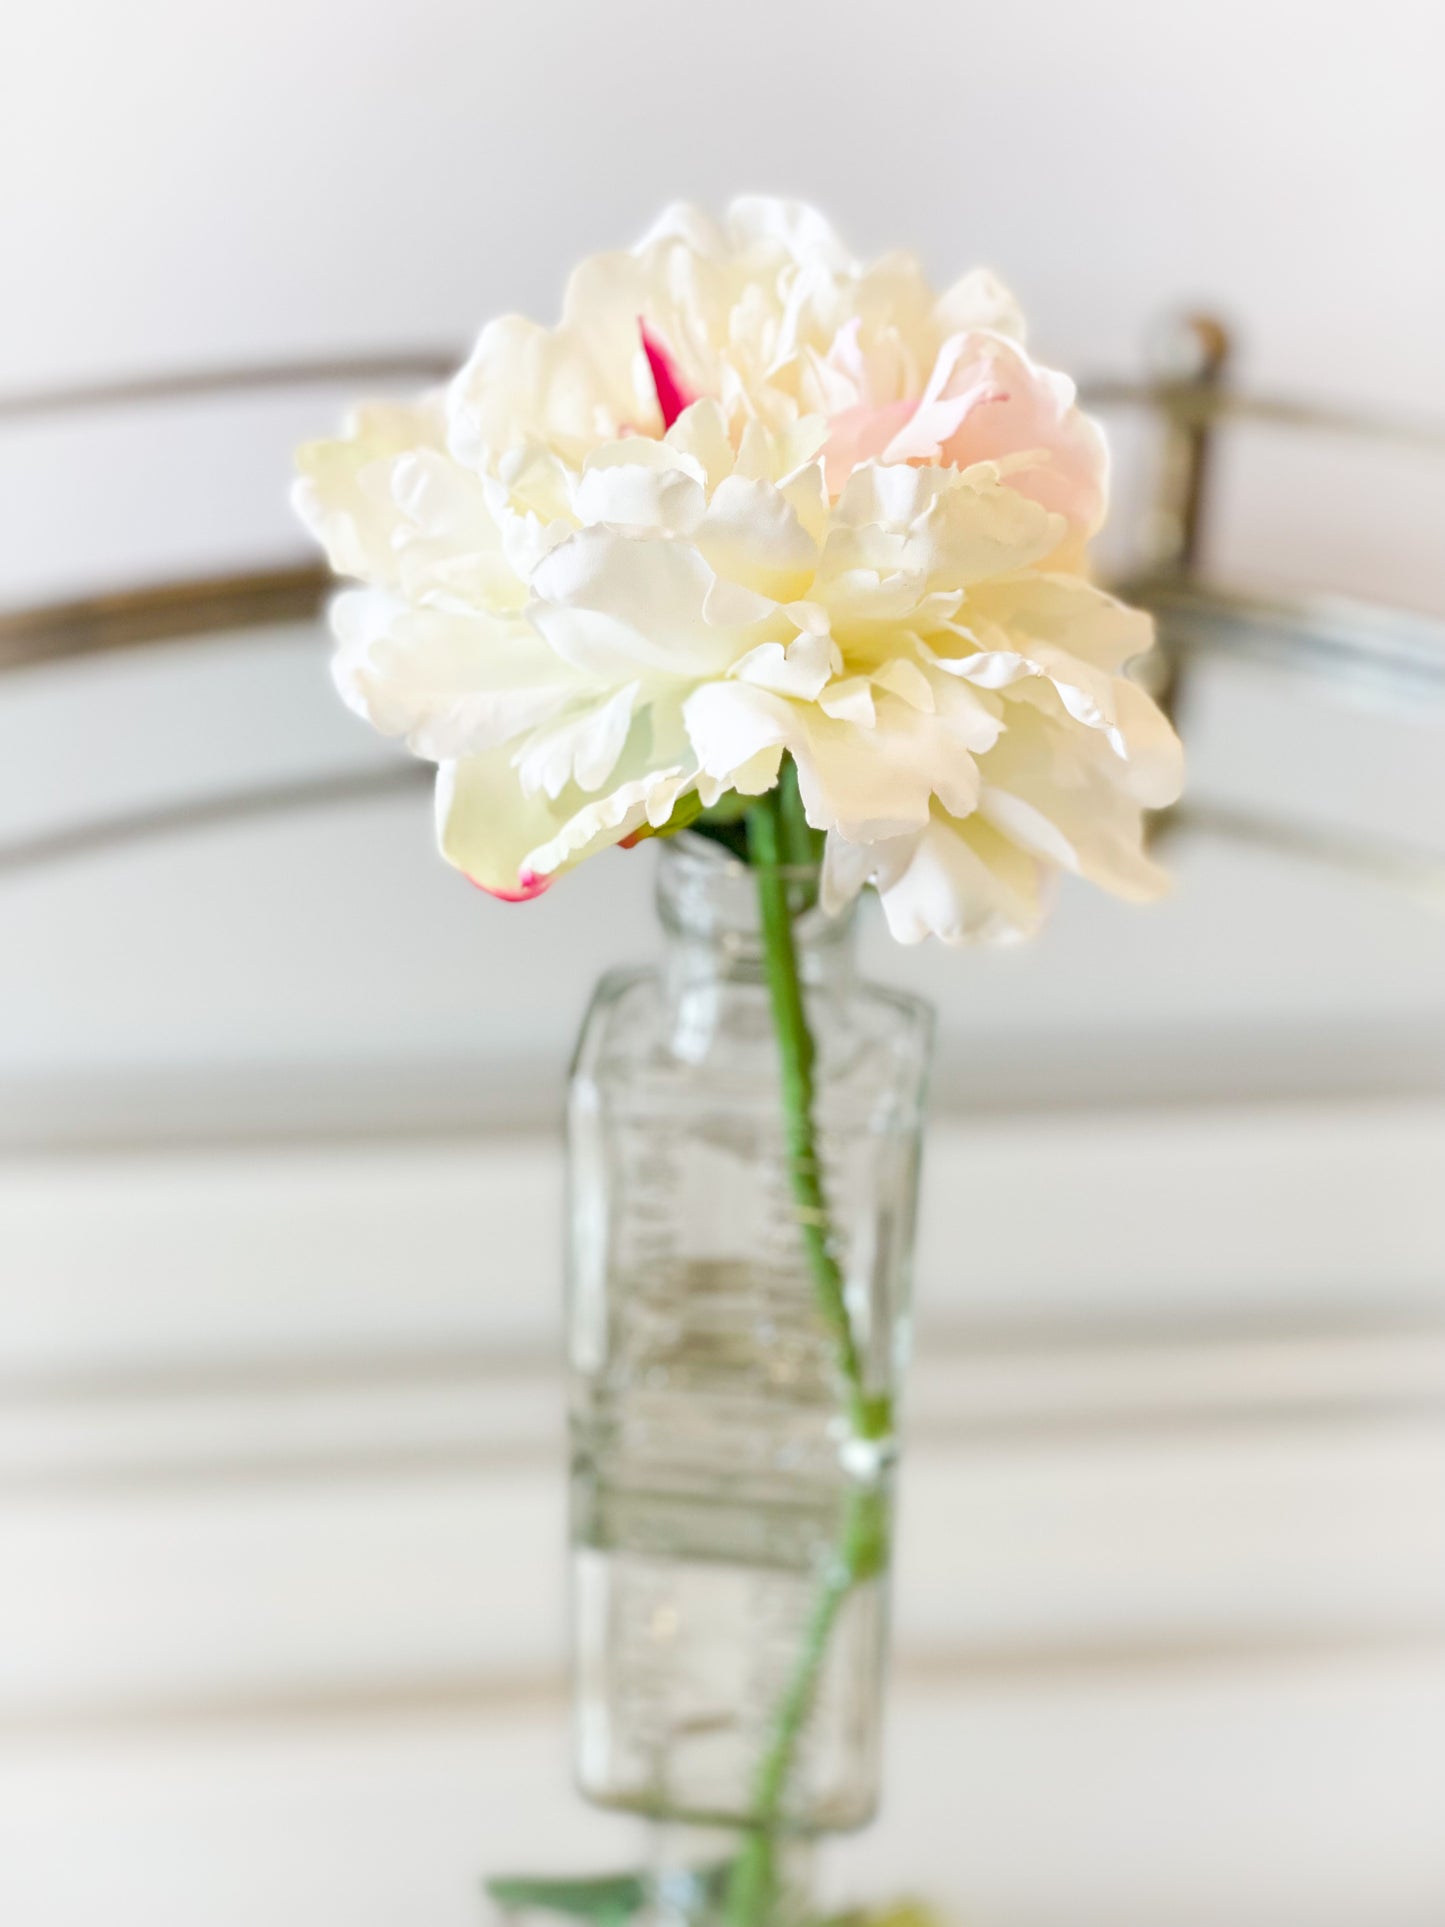 WHITE PEONY IN GLASS VASE WITH ACRYLIC WATER